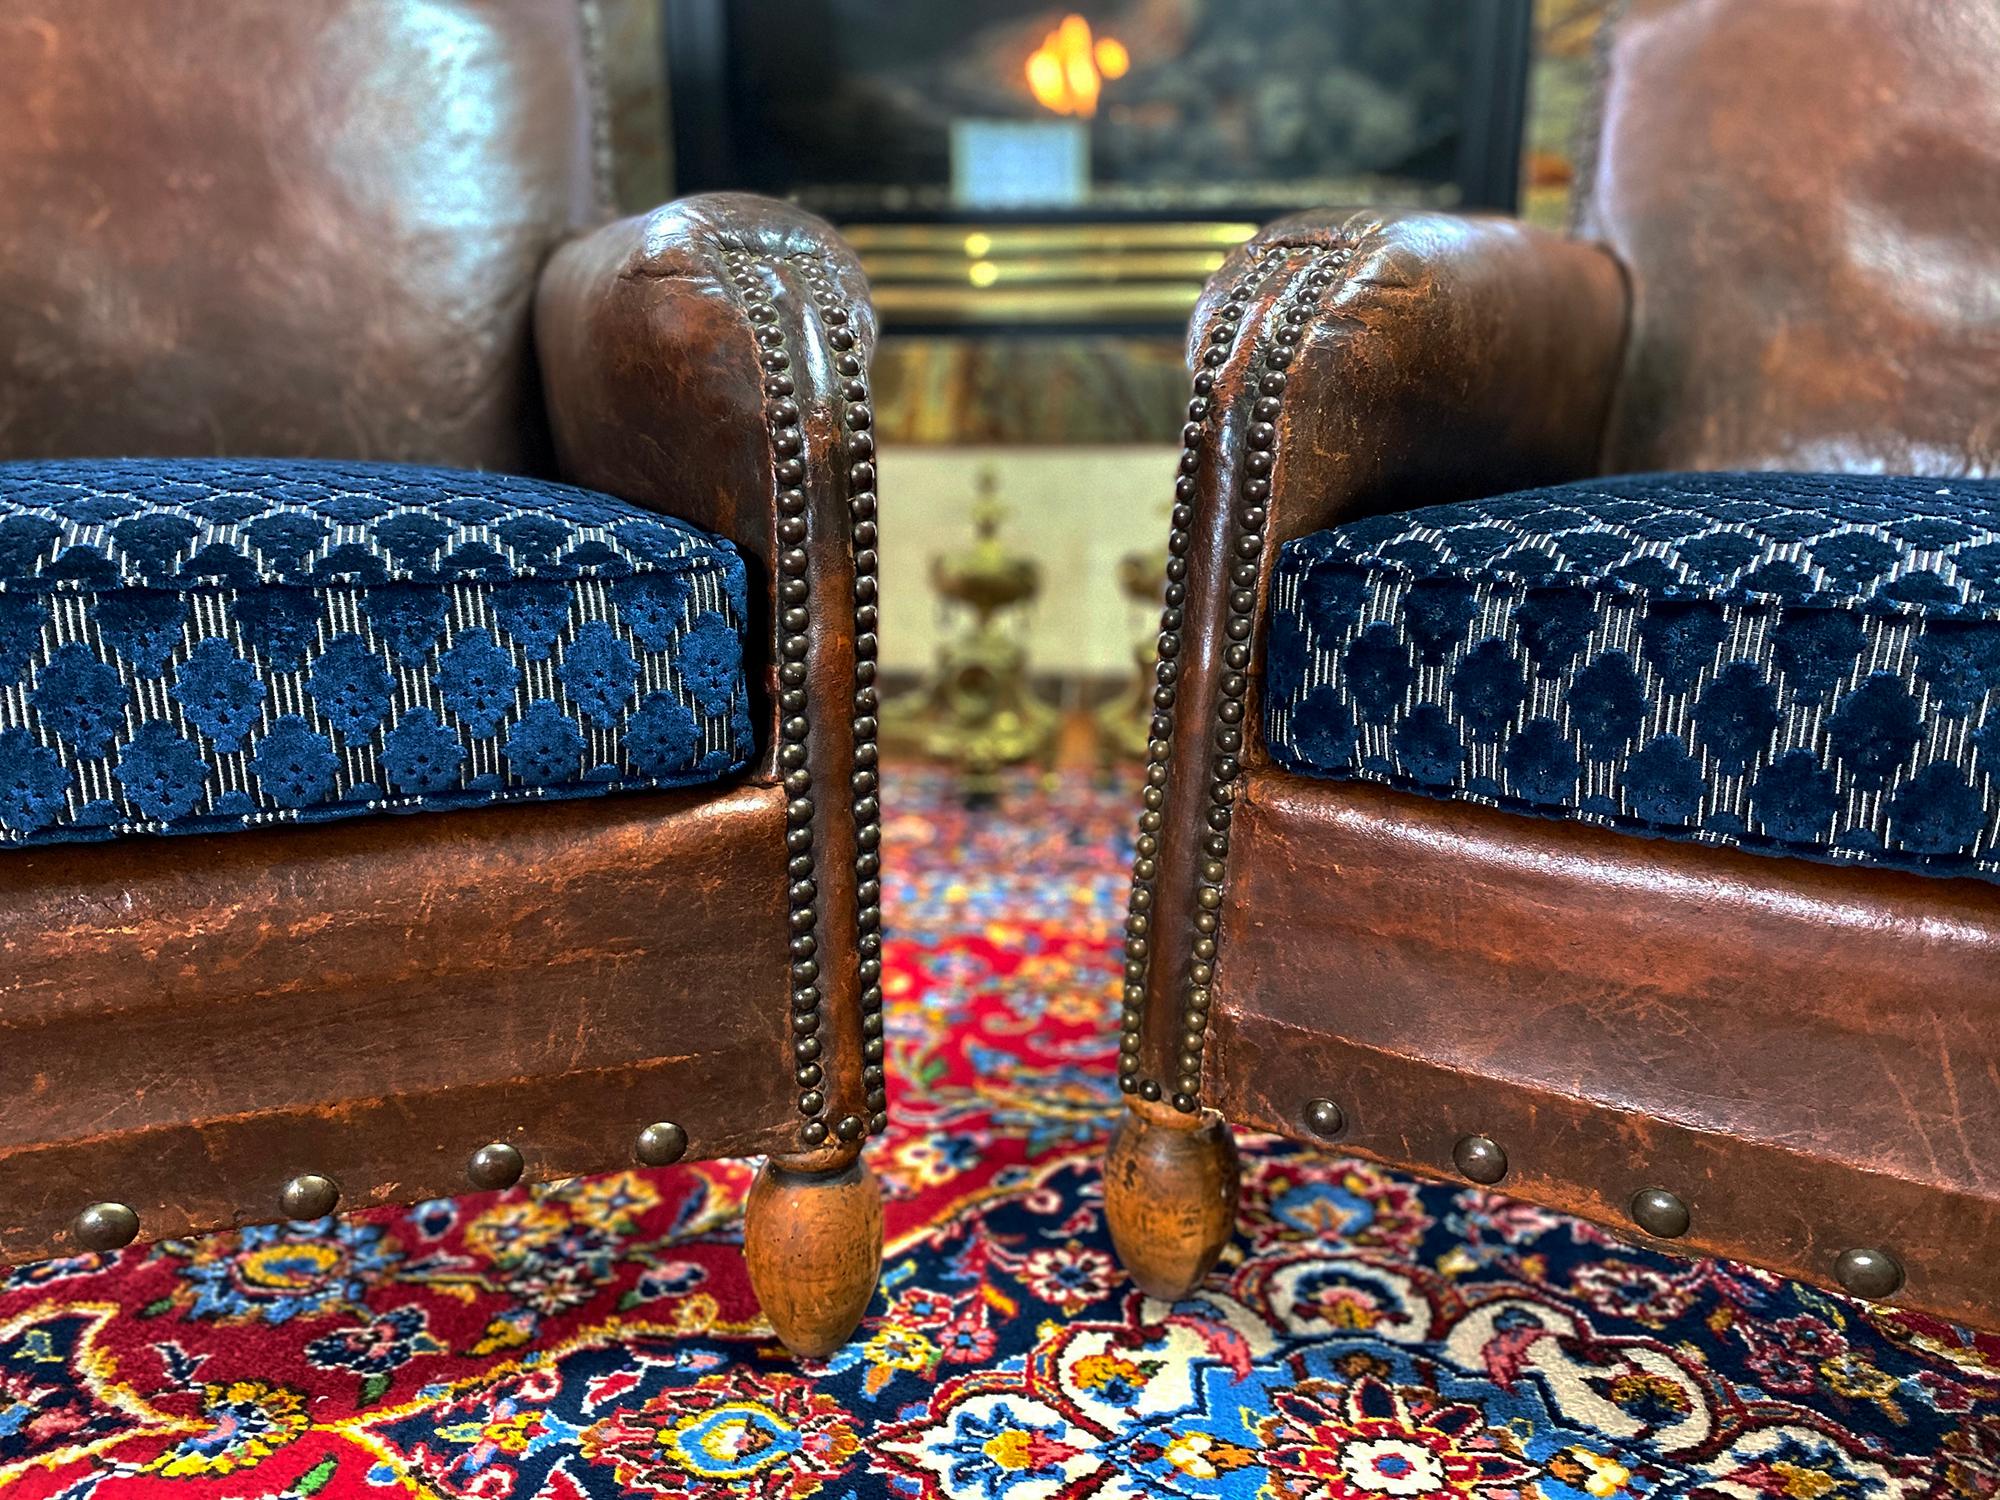 Pair of 1930 Art Deco leather chairs are from Paris, France, circa 1930. Cushions reupholstered with Christian LaCroix blue velvet fabric.
The chair features their original leather with a distressed and aged patina in very good condition. 
Stylish